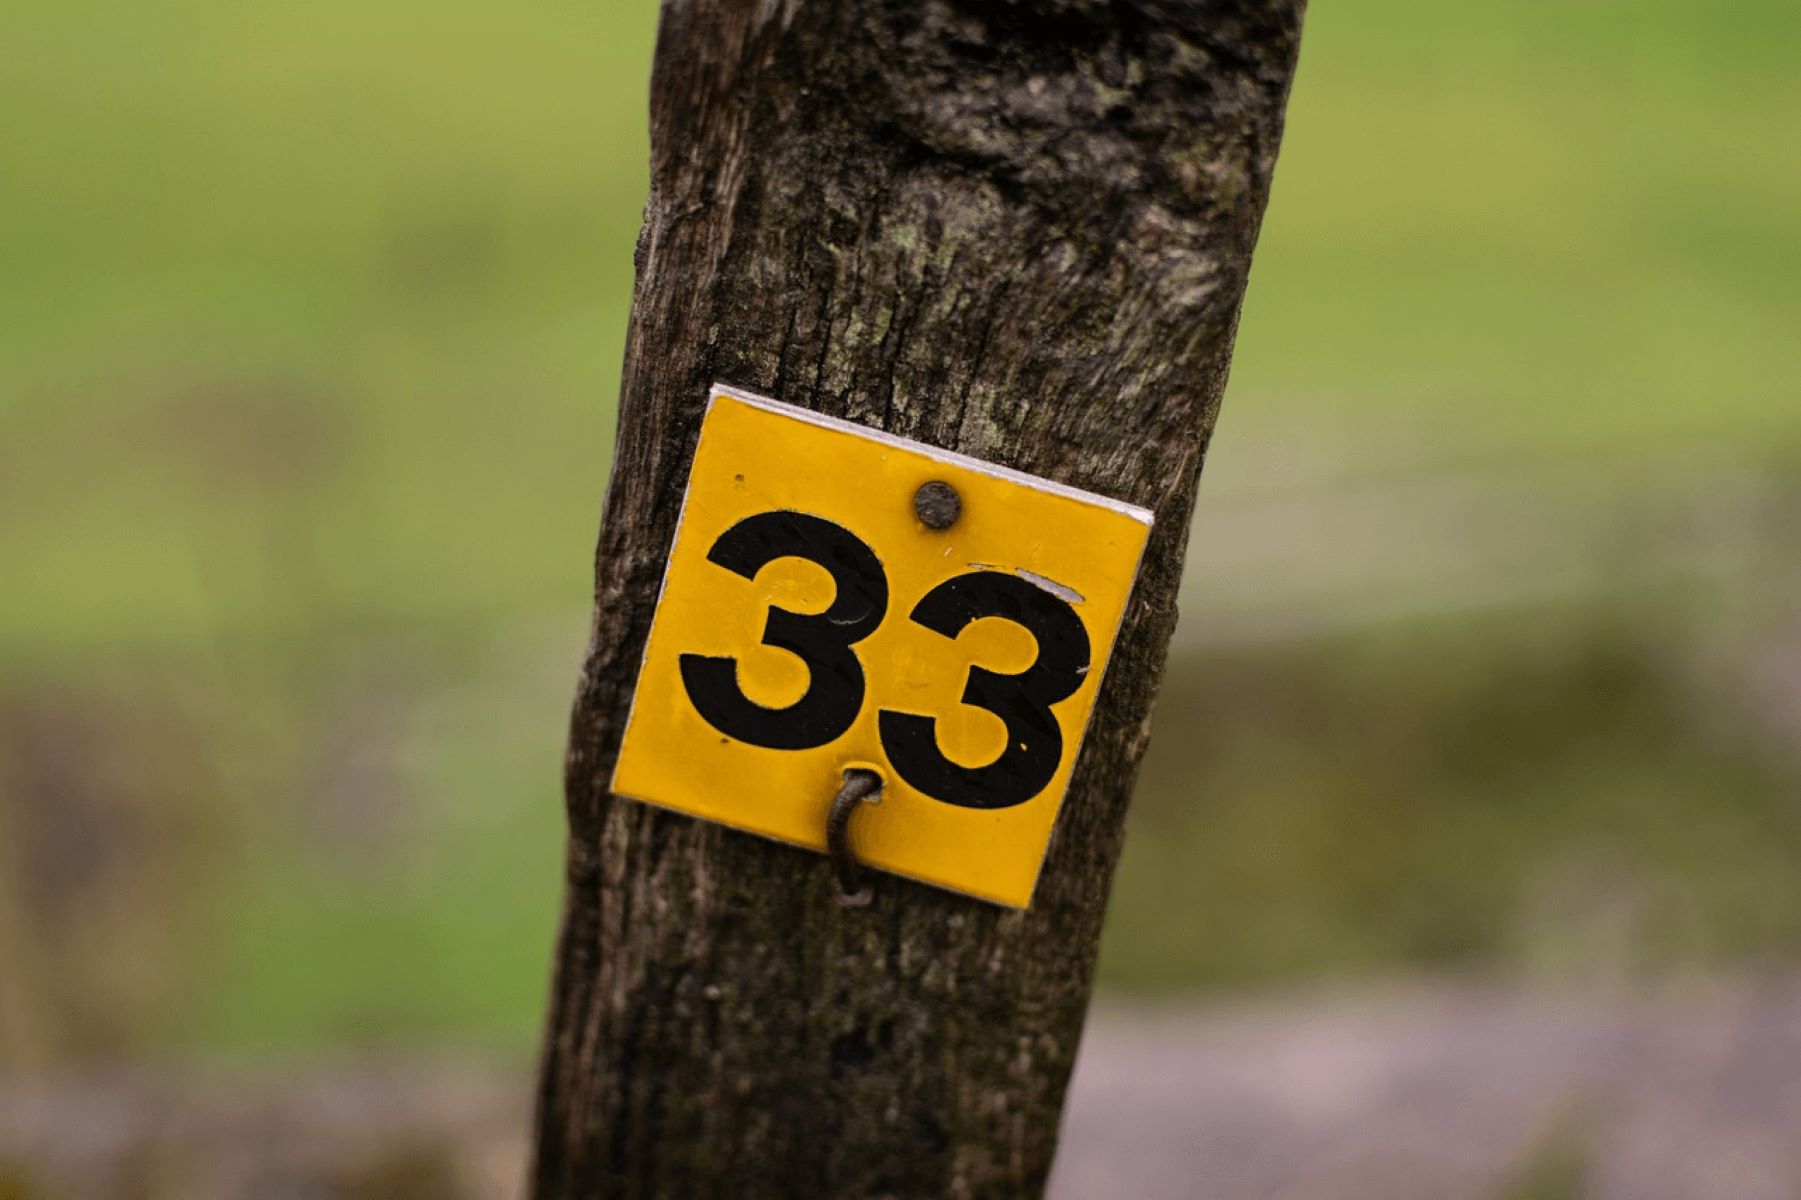 The Mysterious Significance Of The Number 33 Revealed – Why Is It Following You Everywhere?